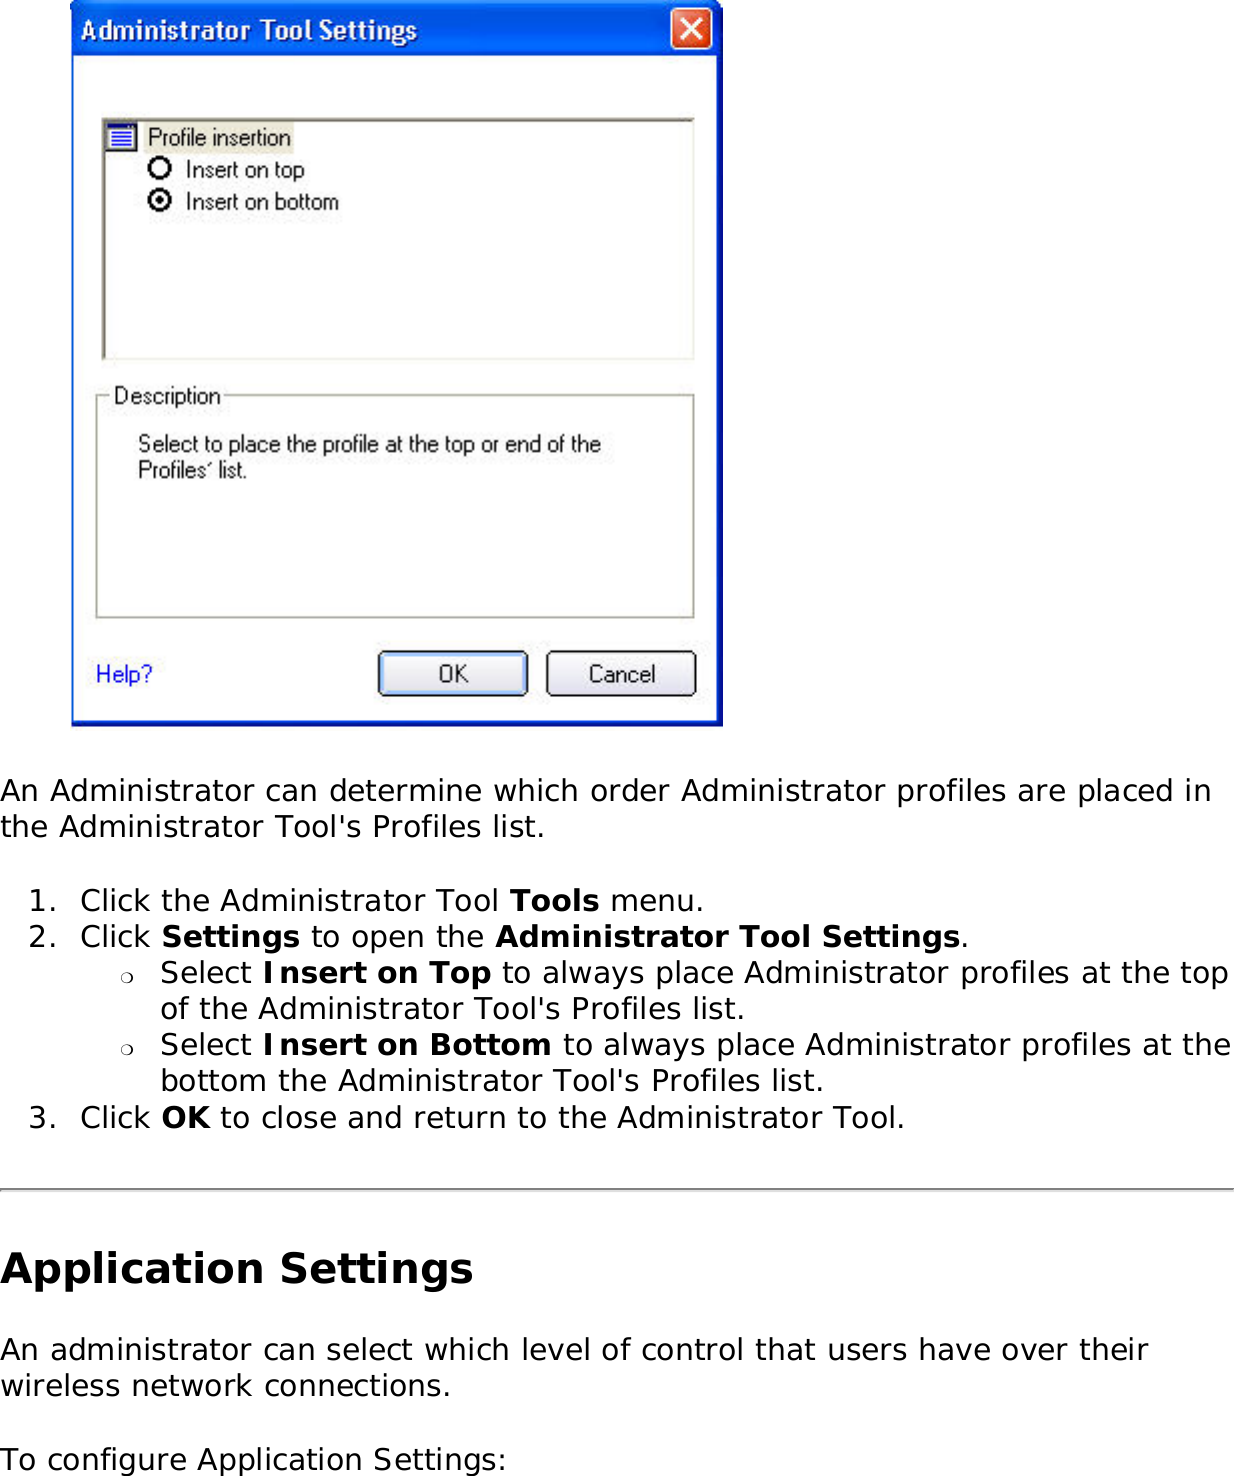  An Administrator can determine which order Administrator profiles are placed in the Administrator Tool&apos;s Profiles list. 1.  Click the Administrator Tool Tools menu. 2.  Click Settings to open the Administrator Tool Settings. ❍     Select Insert on Top to always place Administrator profiles at the top of the Administrator Tool&apos;s Profiles list.❍     Select Insert on Bottom to always place Administrator profiles at the bottom the Administrator Tool&apos;s Profiles list.3.  Click OK to close and return to the Administrator Tool. Application SettingsAn administrator can select which level of control that users have over their wireless network connections. To configure Application Settings: 